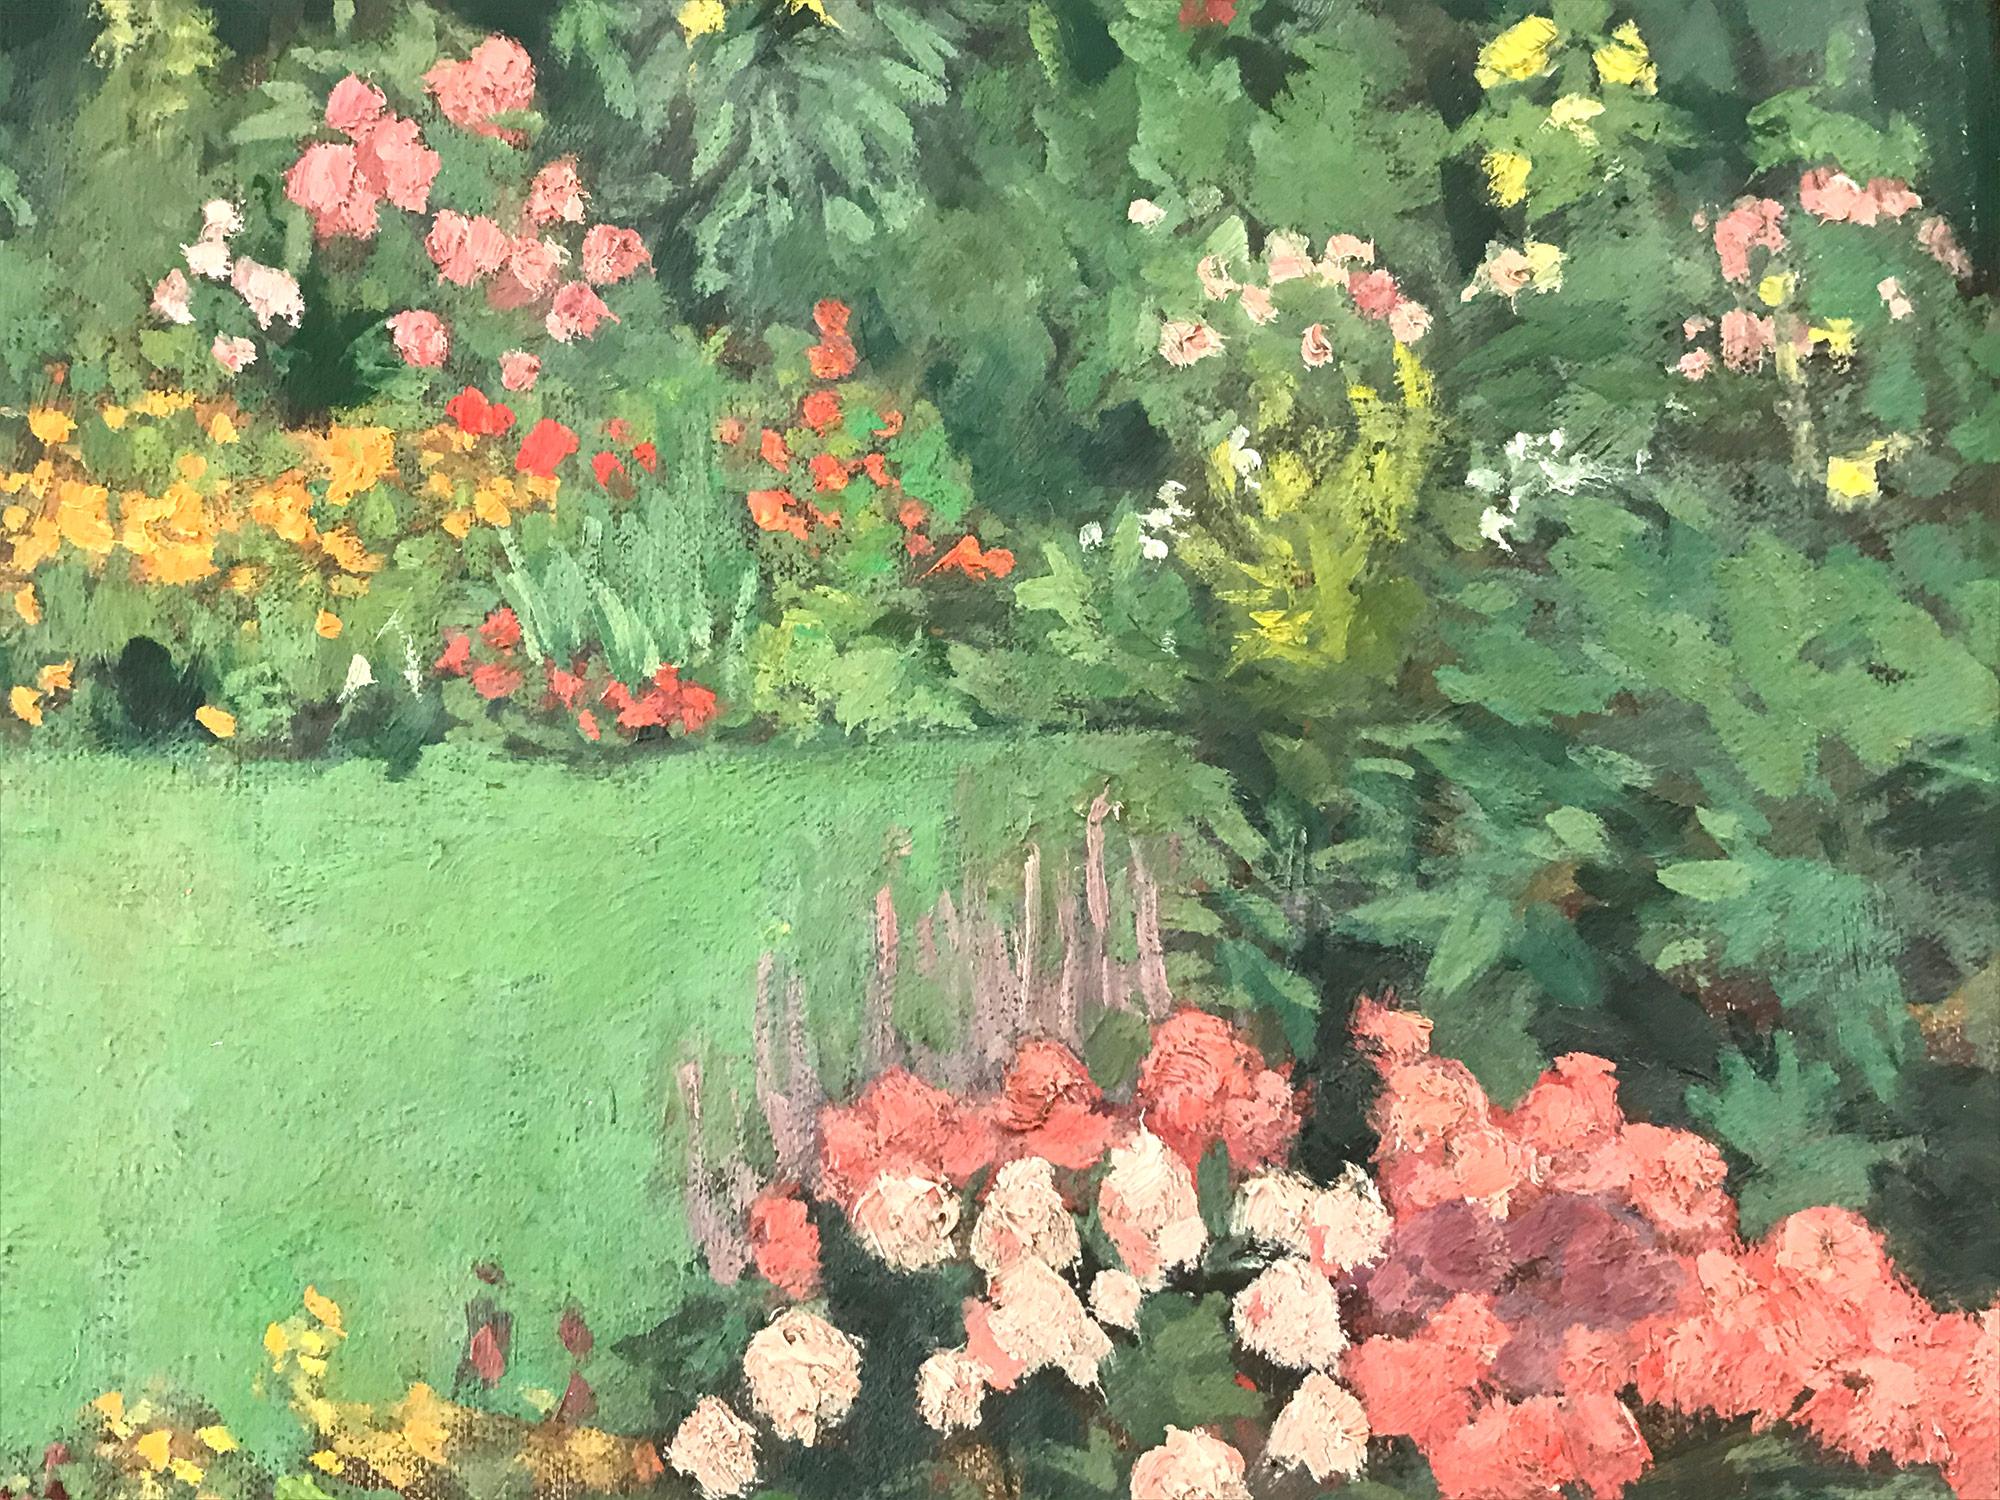 A stunning depiction of a view of the Garden by Dutch painter Elsa Wouterse van Doesburgh depicting a lush garden with colorful flowers. Doesburgh was known for her oil paintings of lush landscapes, the county side and for her still-life studies of